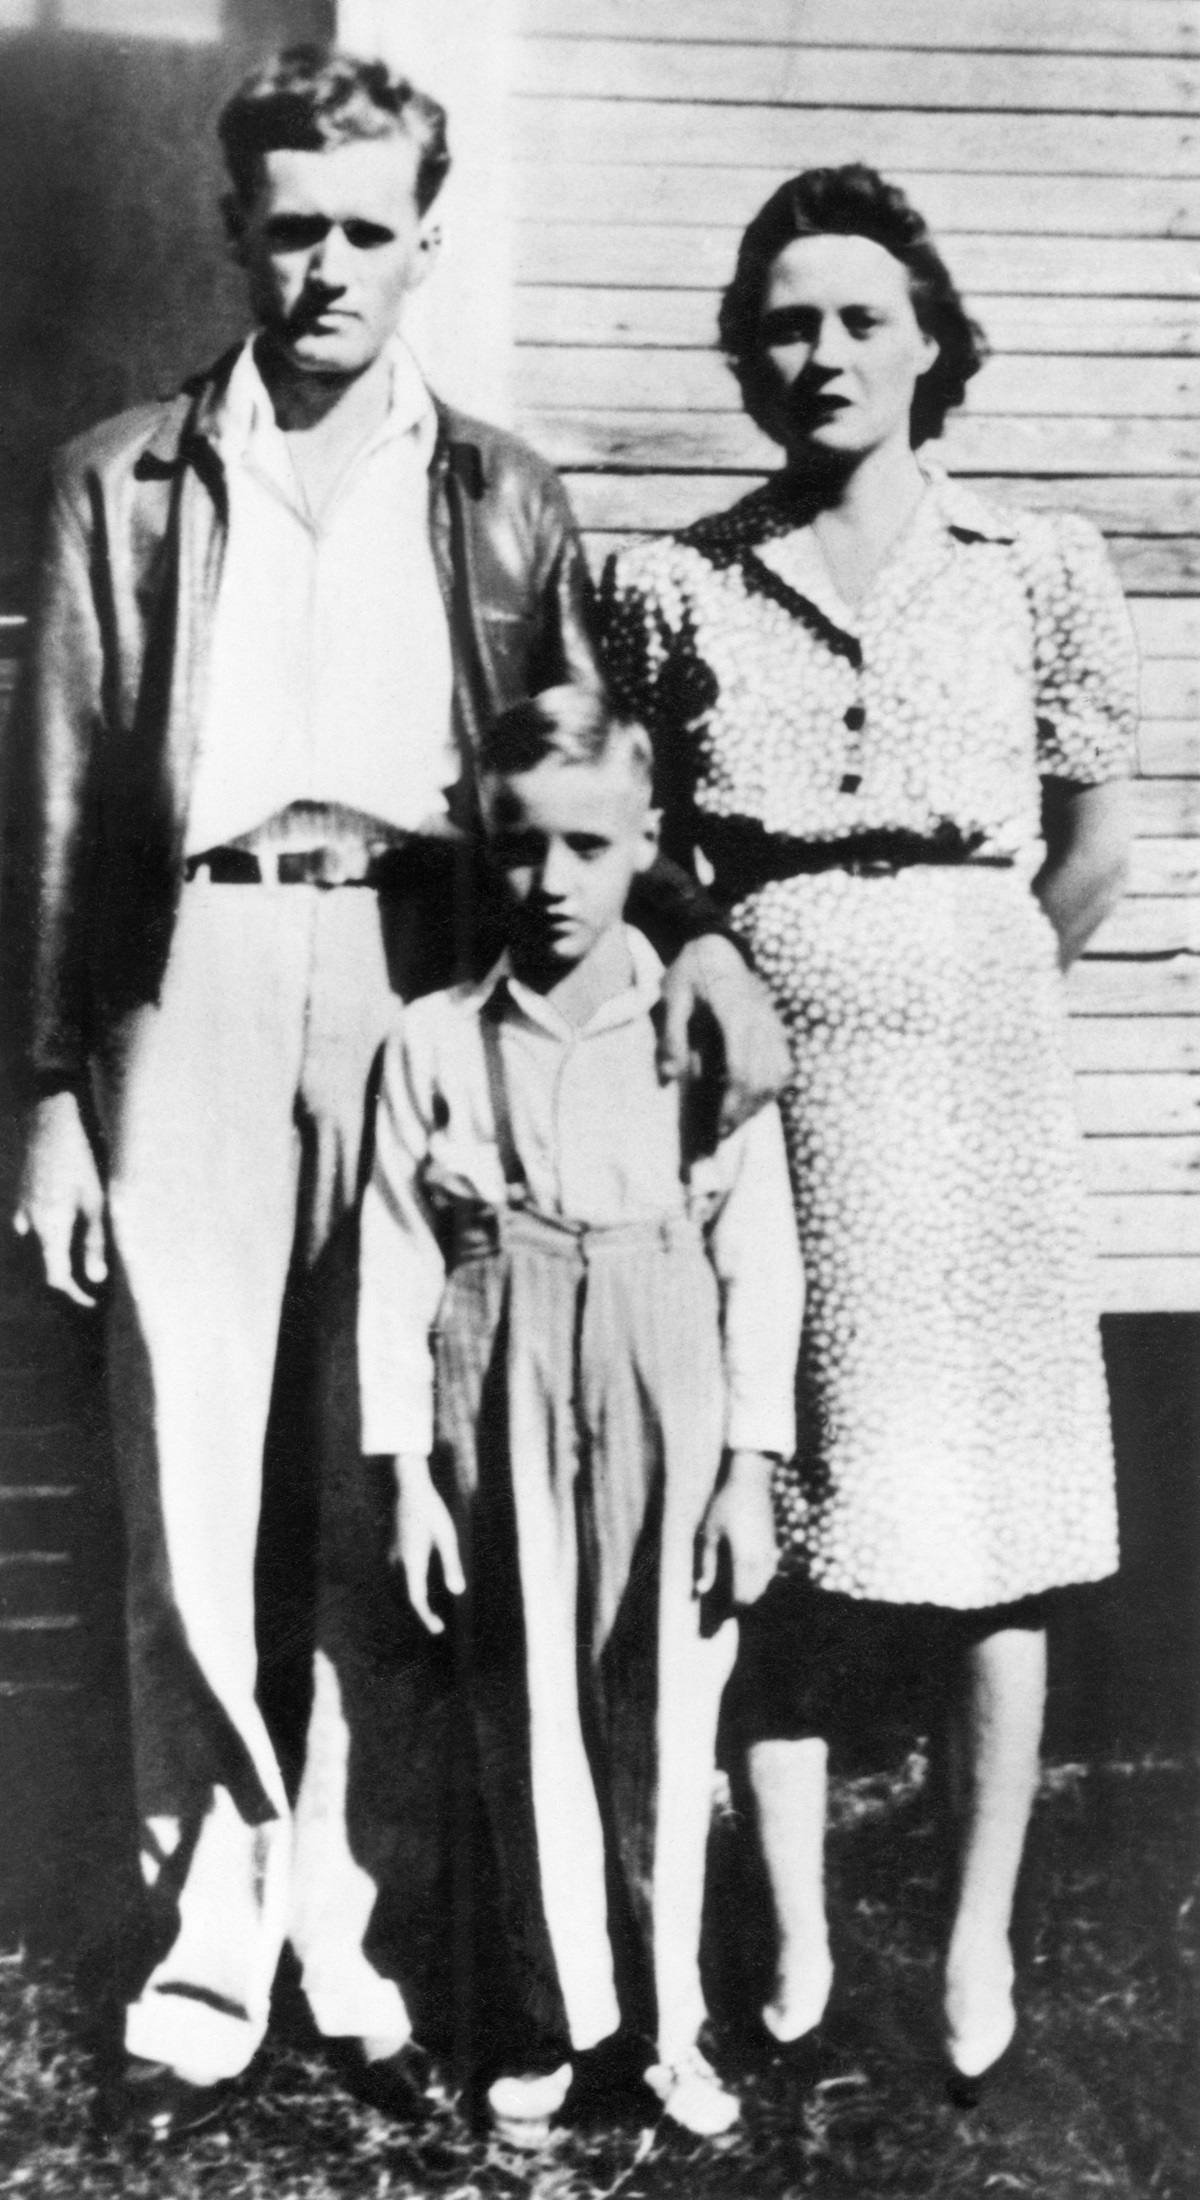 Elvis Presley as a child with his parents, Vernon Presley and Gladys Presley